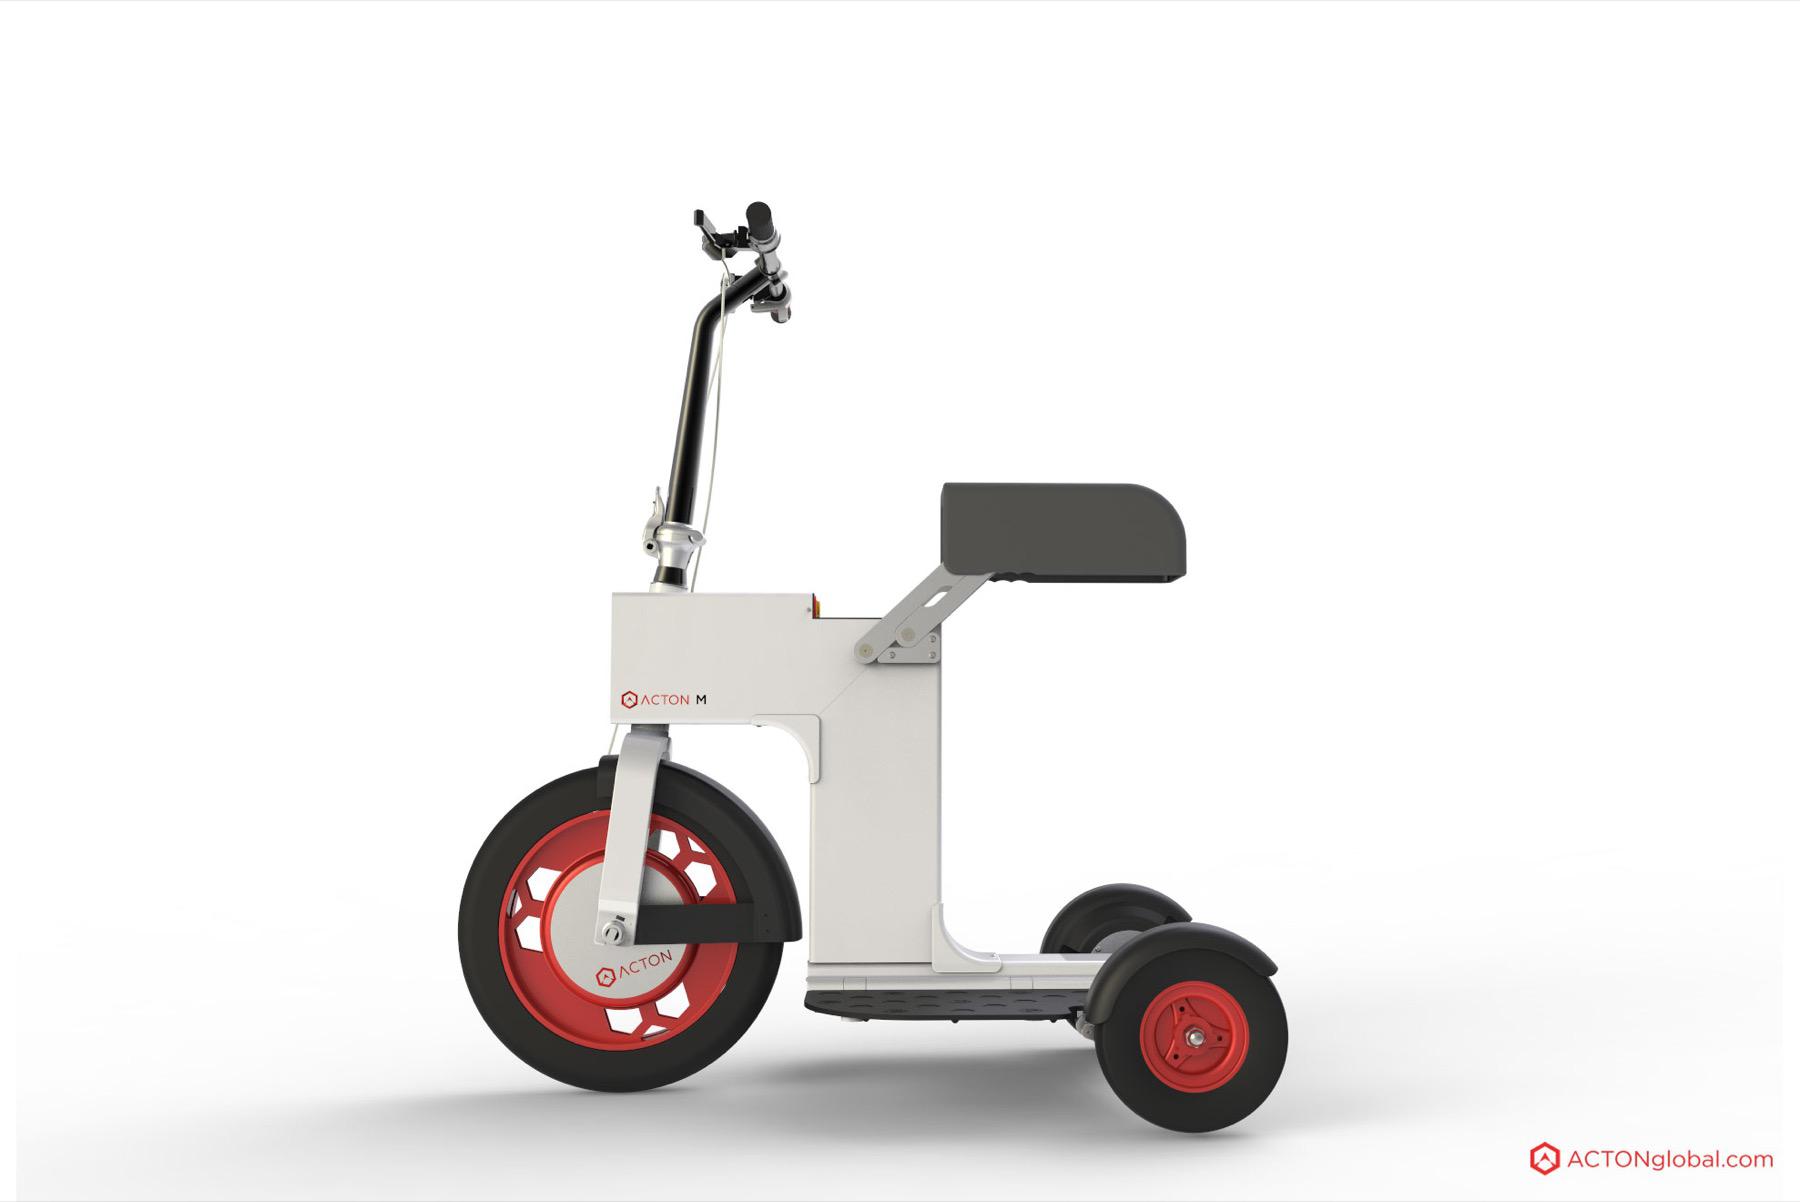 M scooter